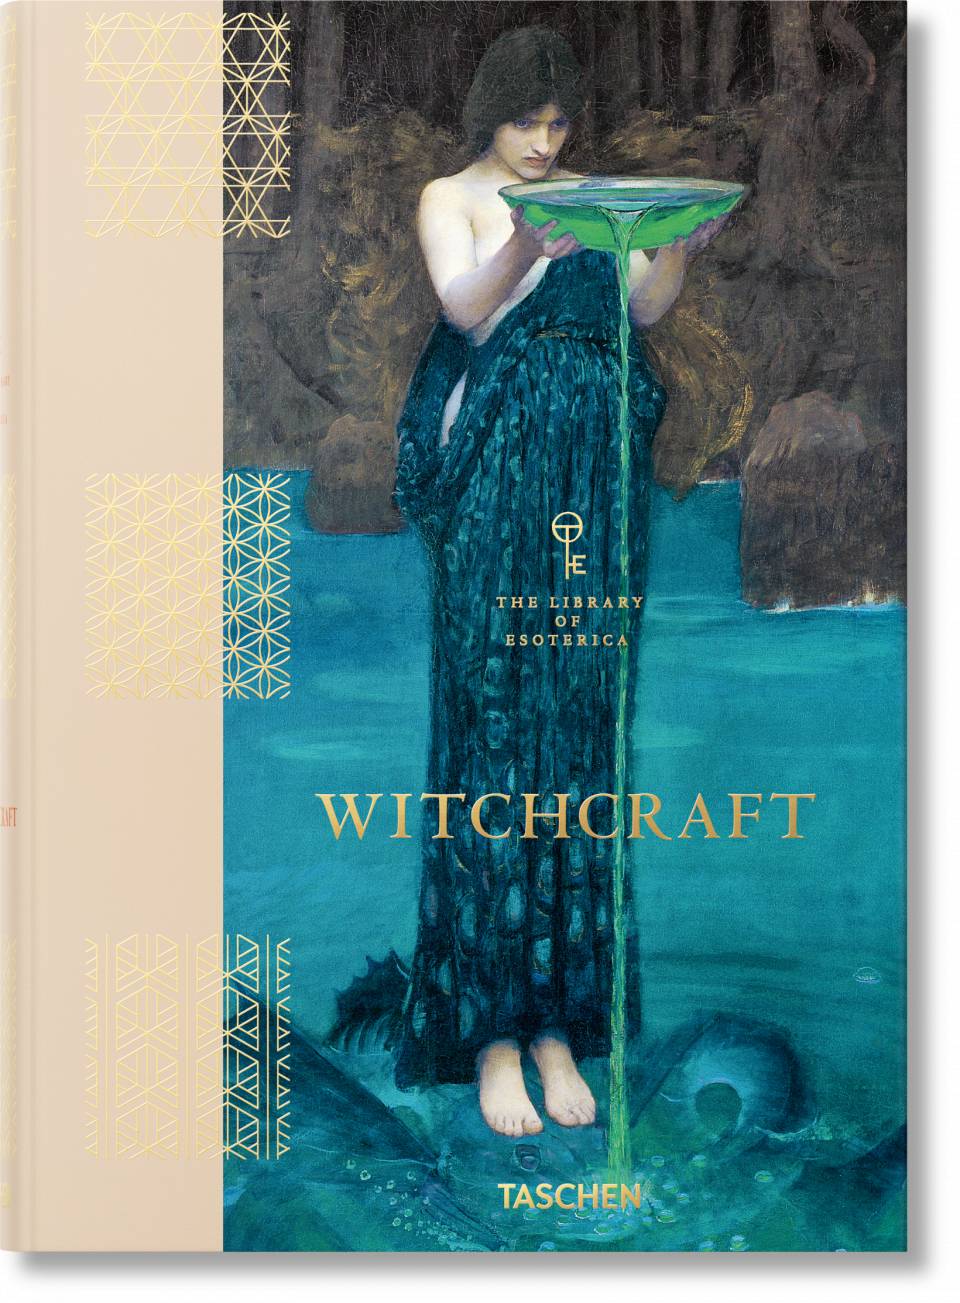 Witchcraft: The Library of Esoterica Vol III